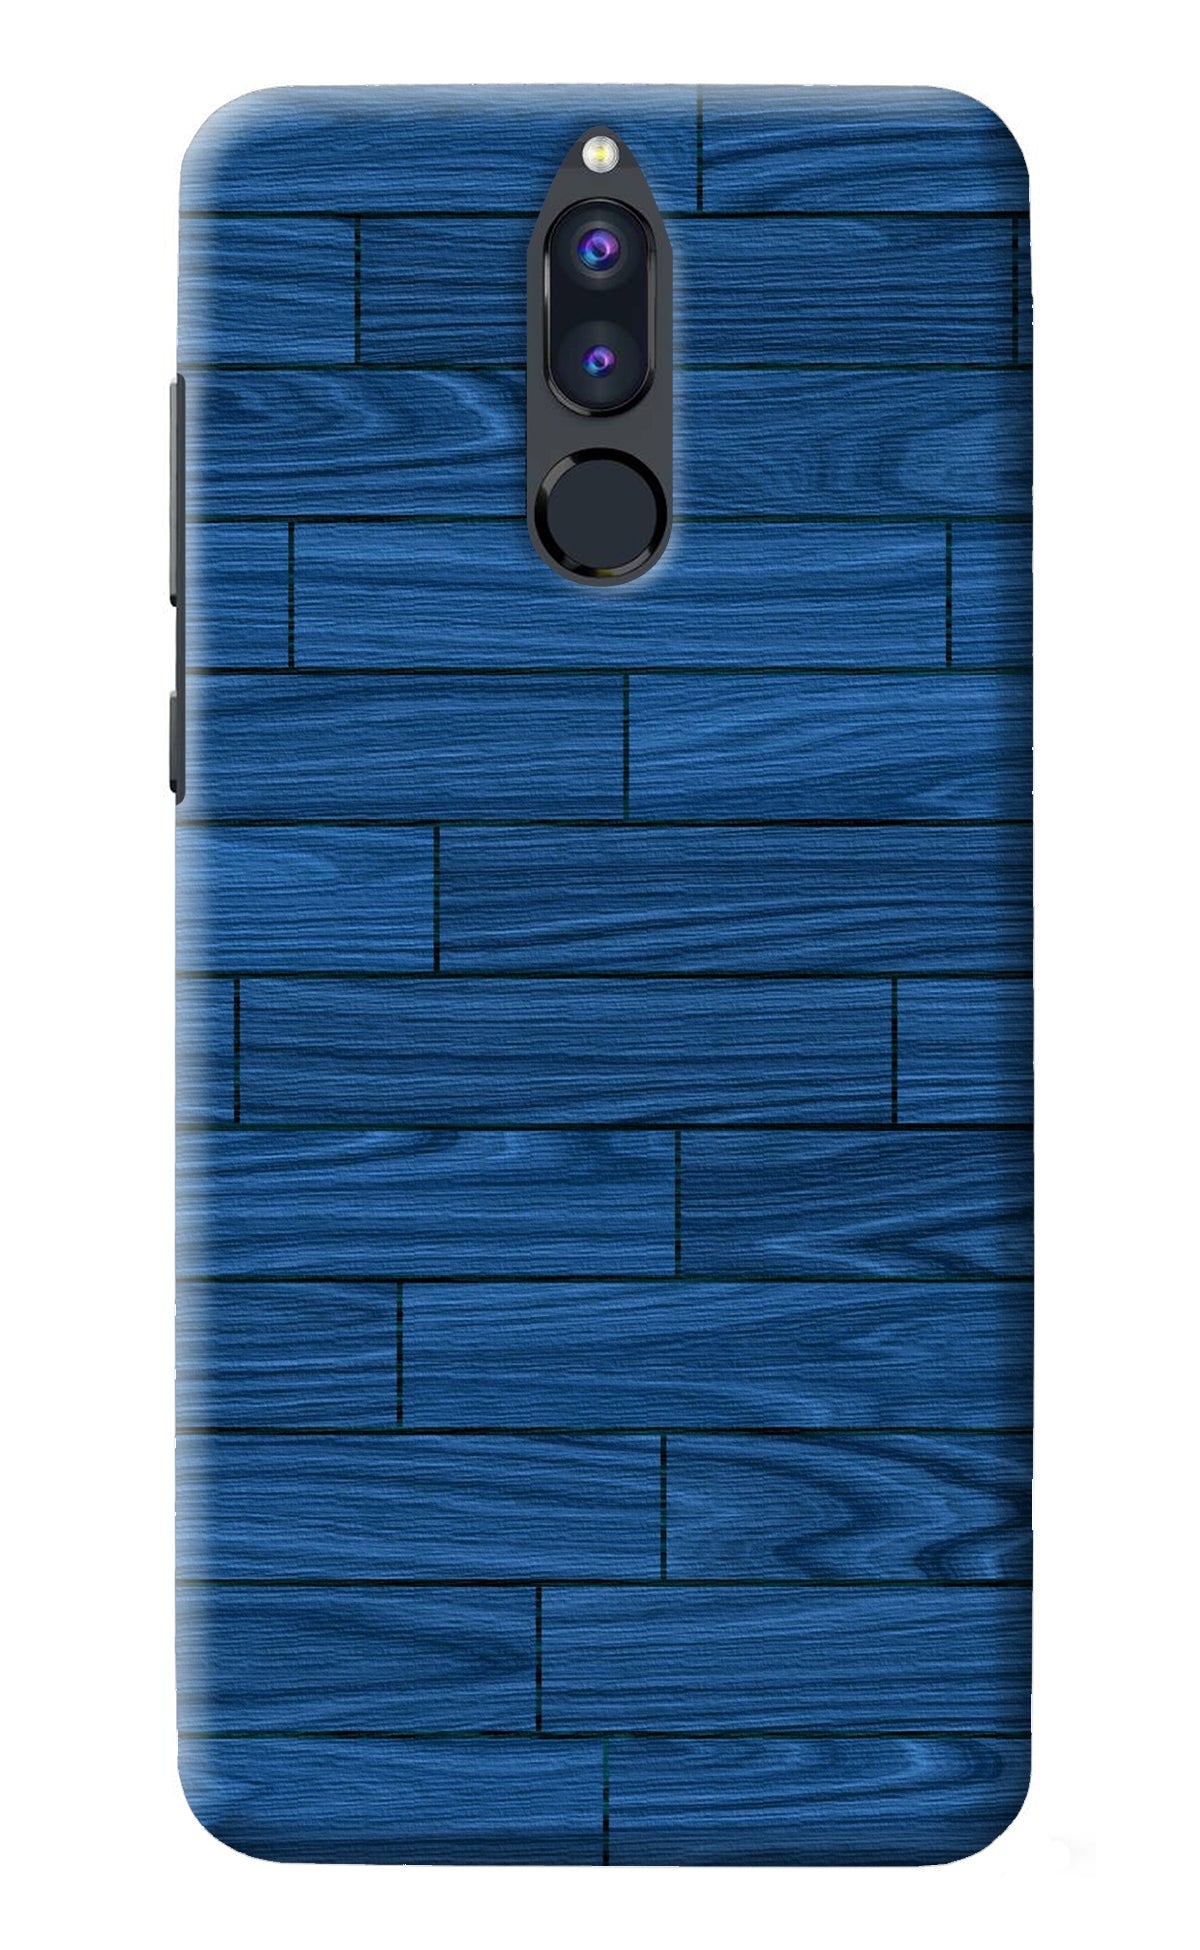 Wooden Texture Honor 9i Back Cover